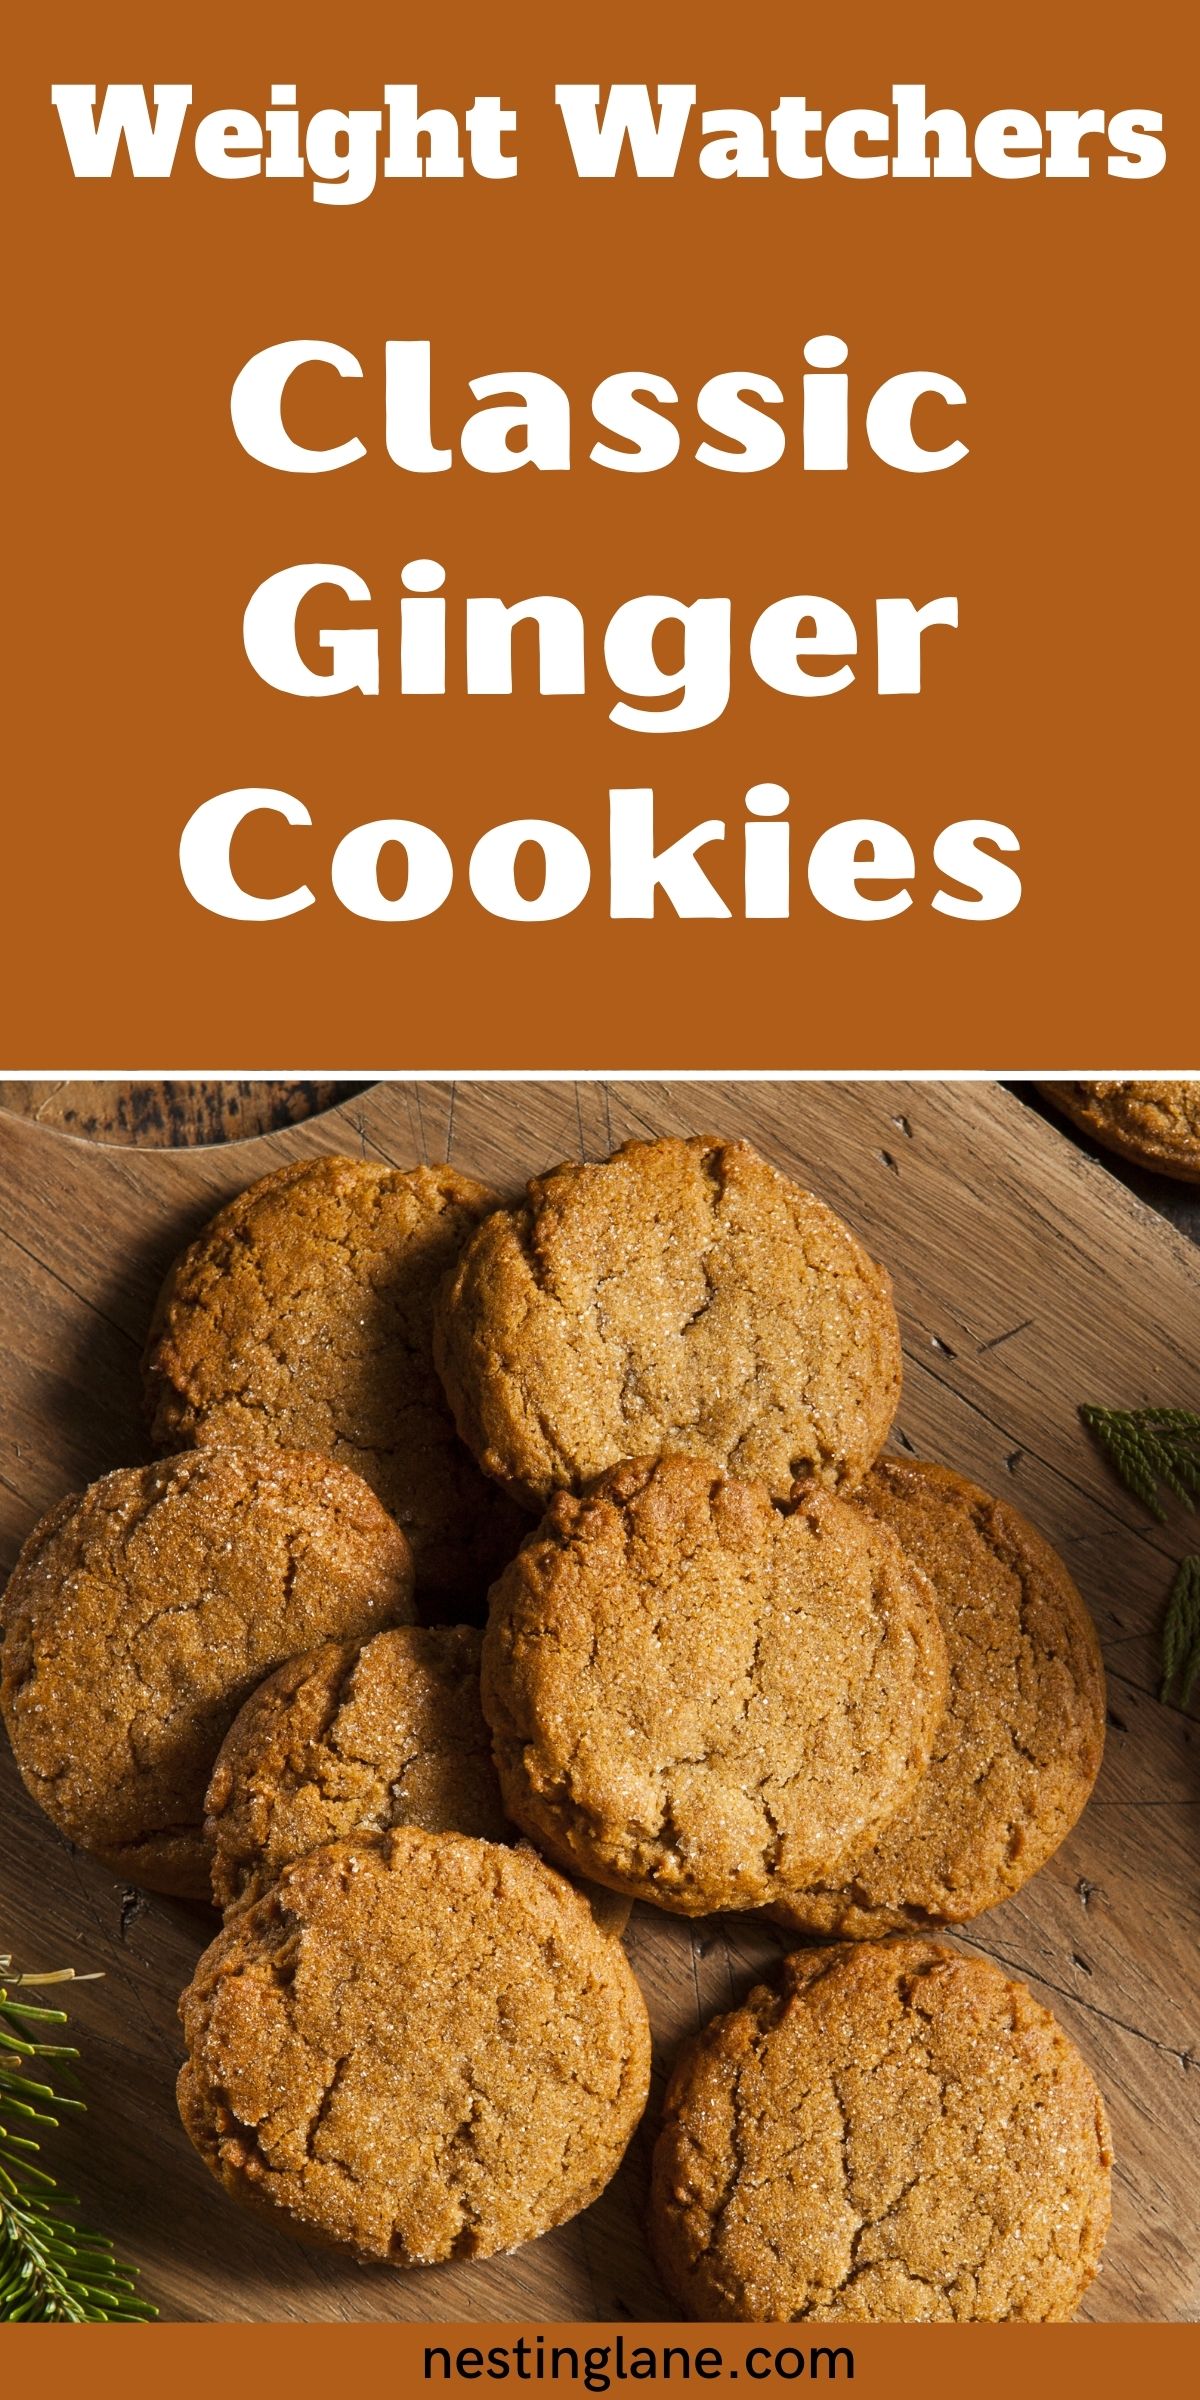 Graphic for Pinterest of Weight Watchers Classic Ginger Cookies Recipe.